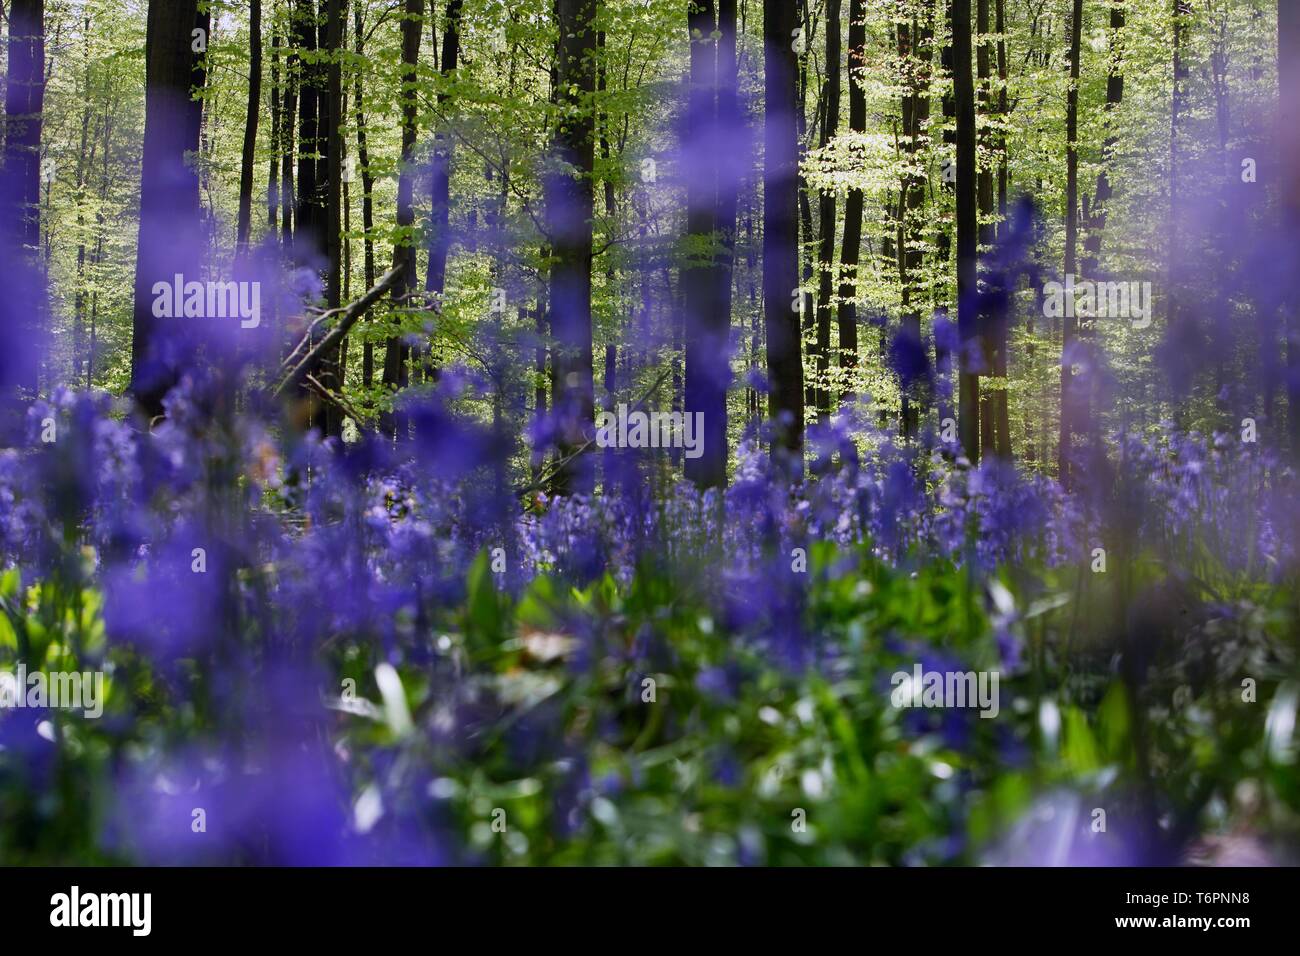 Bell flowers in the forest of Hallebos, Belgium, Europe Stock Photo